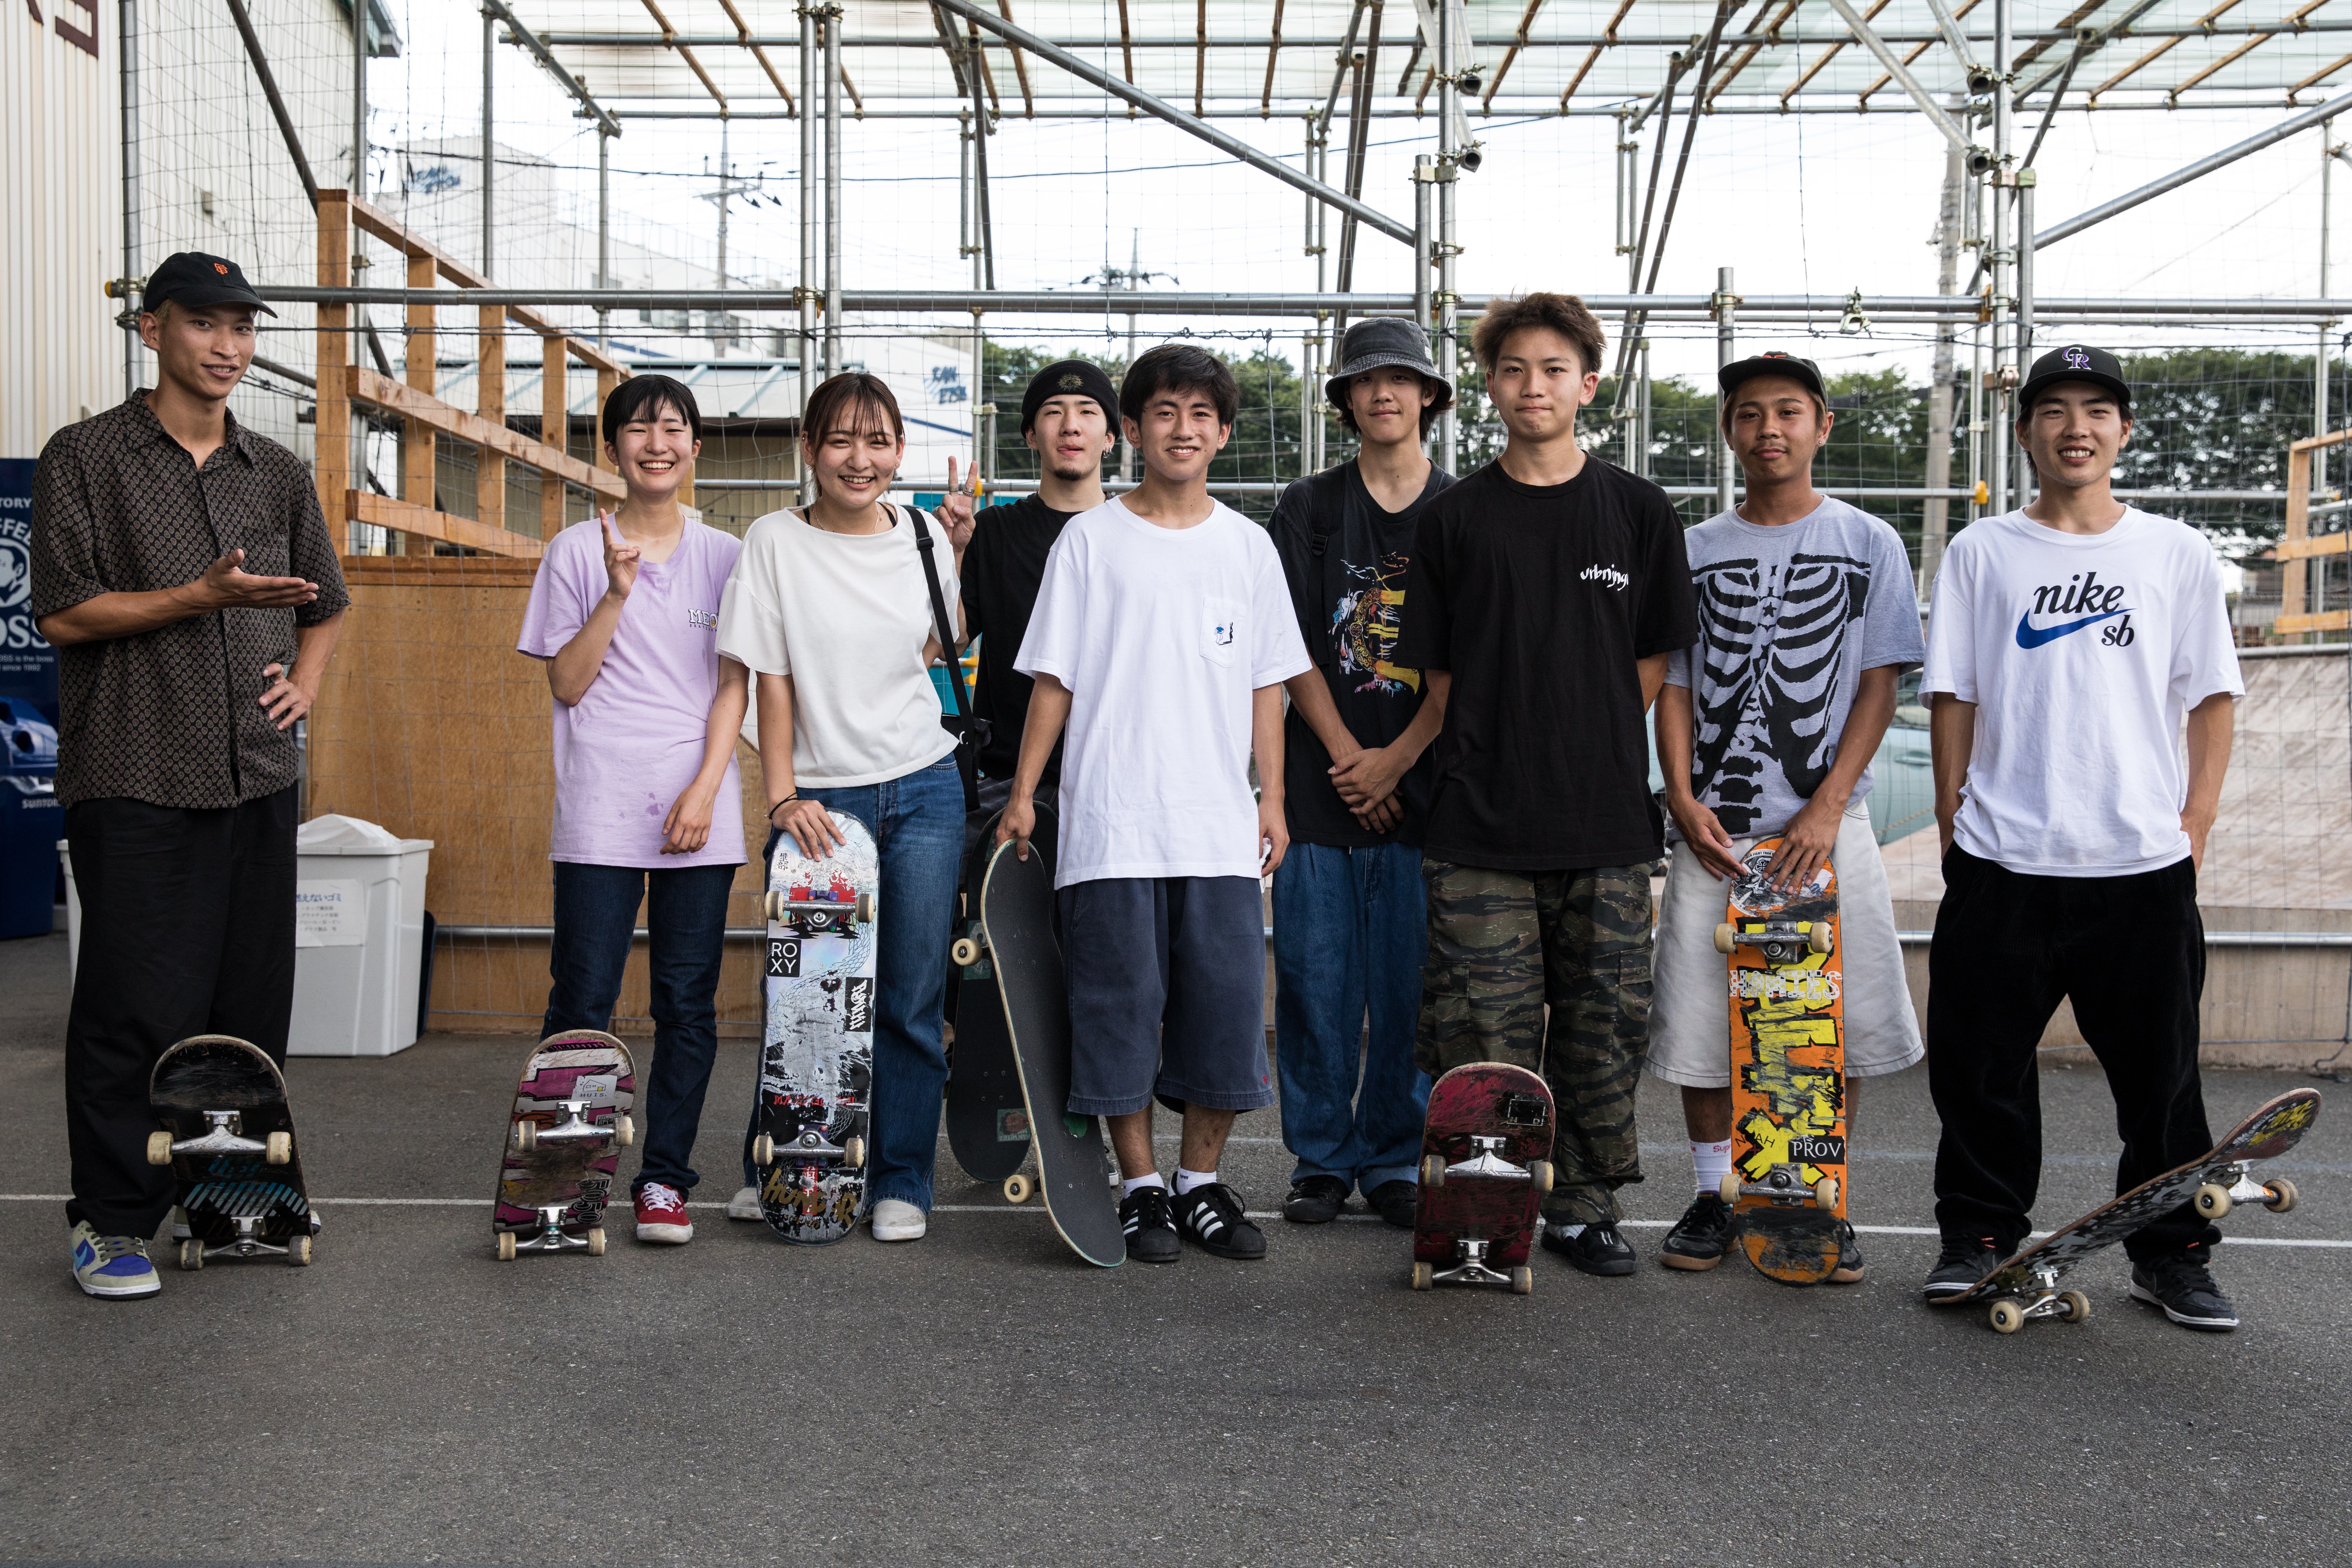 Inside Japans Only Skateboarding High School, Where the Olympics Are Met with Shrugs pic